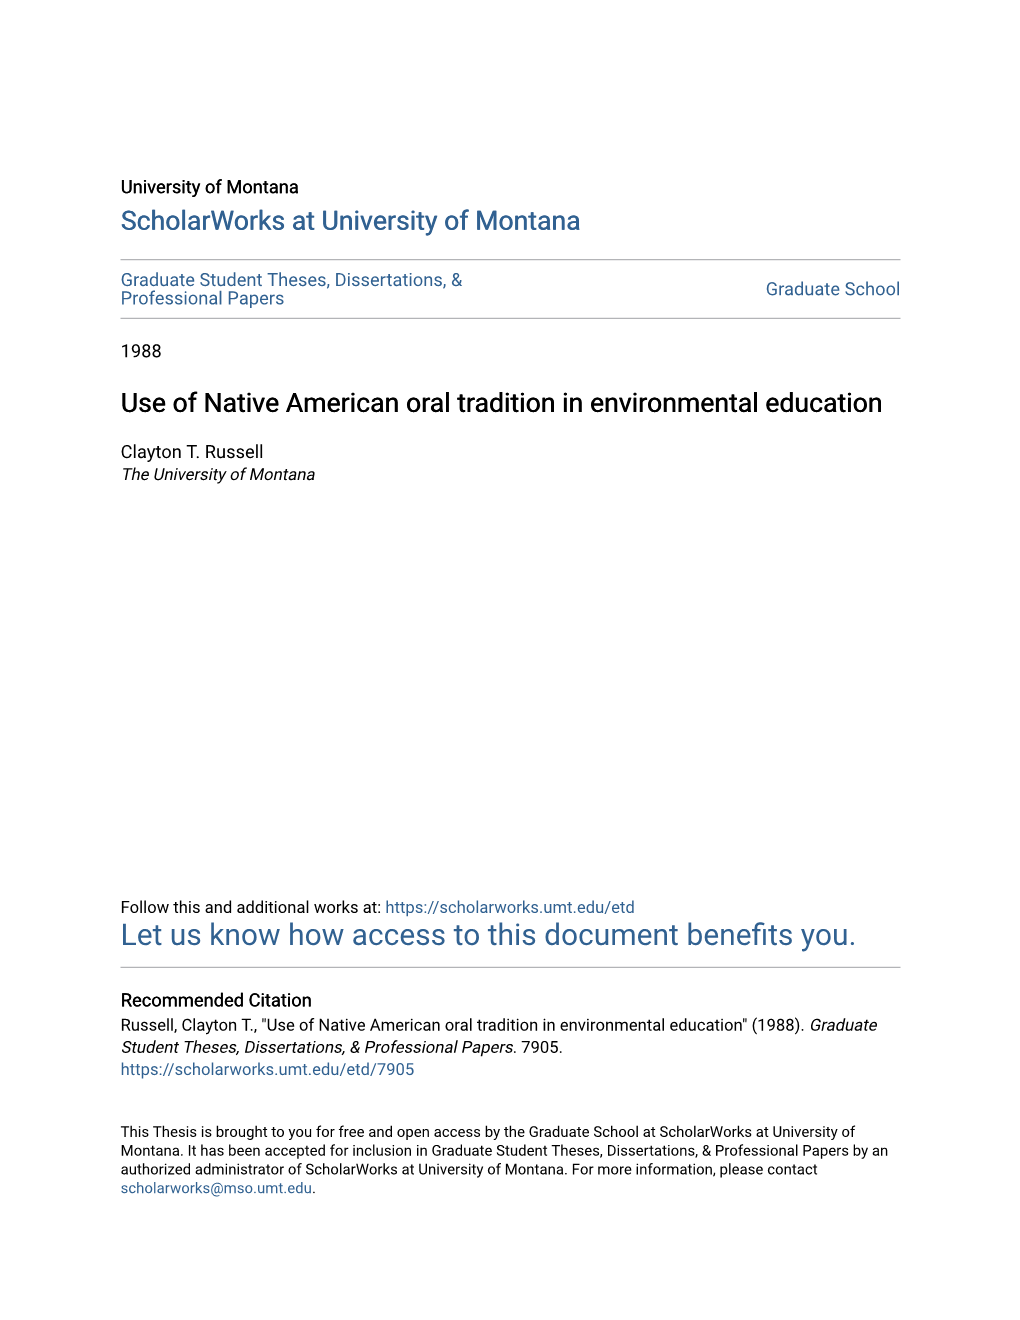 Use of Native American Oral Tradition in Environmental Education